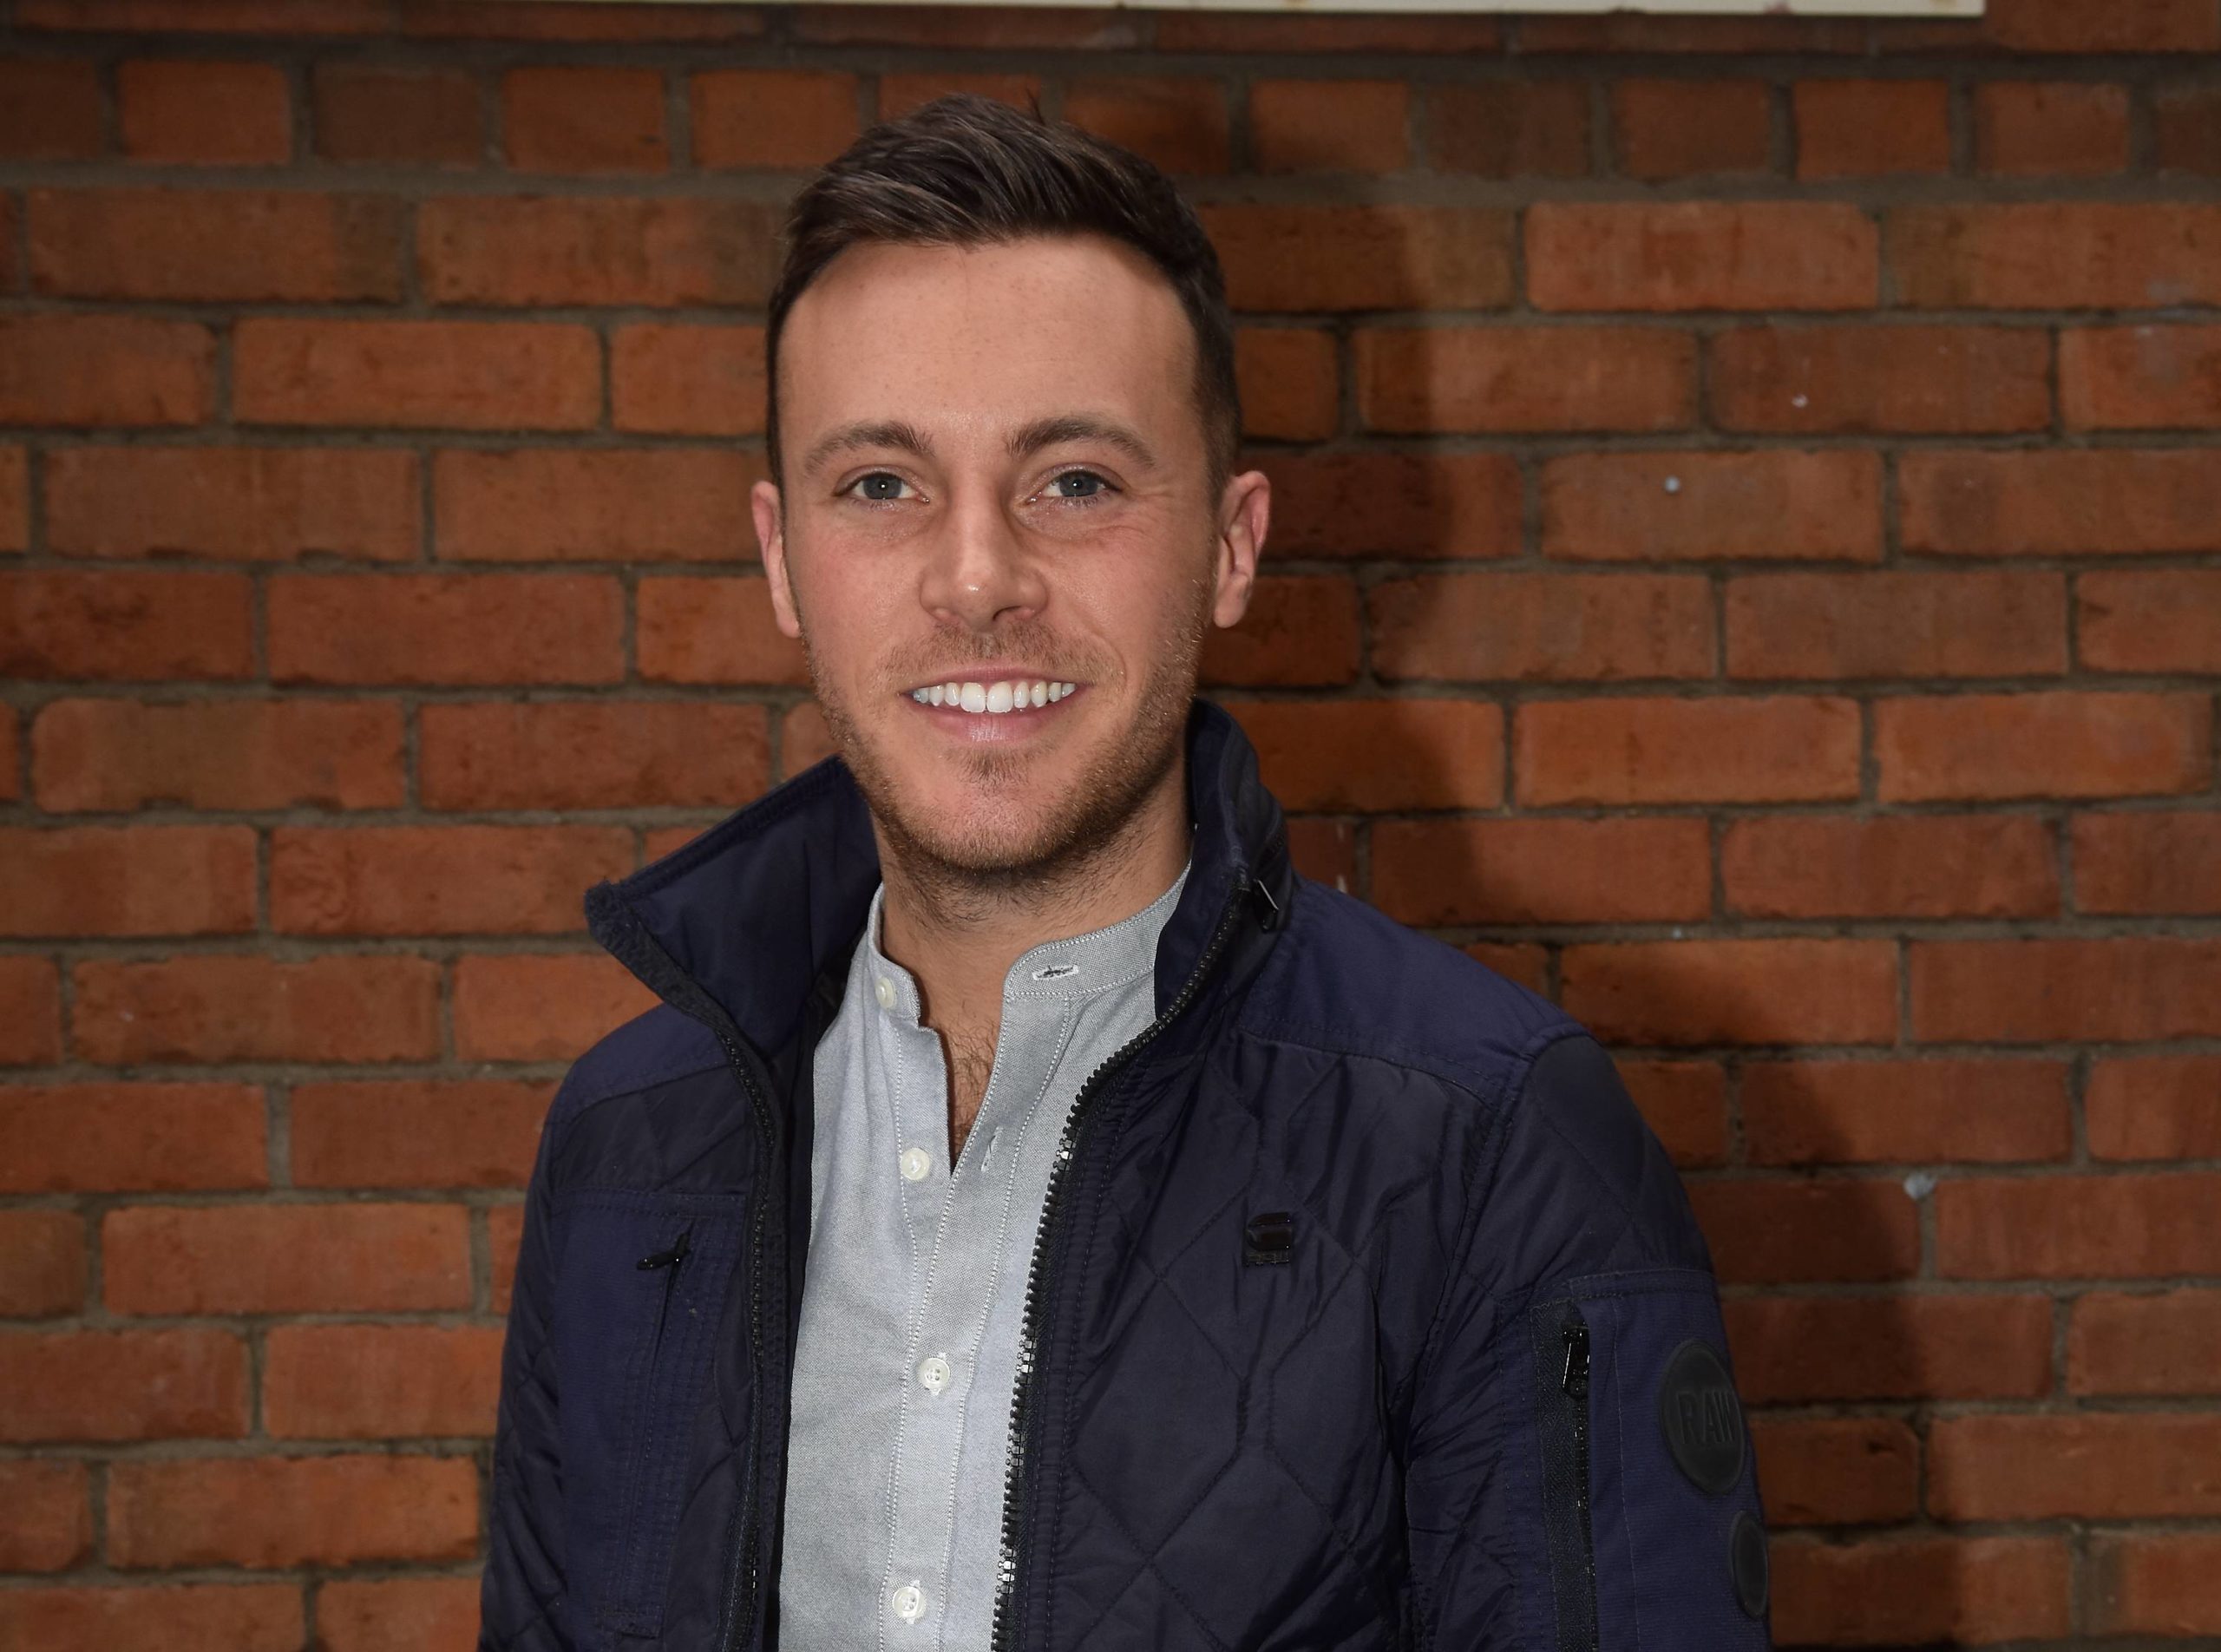 nathan-carter-reveals-he-went-to-therapy-after-drinking-too-much-over